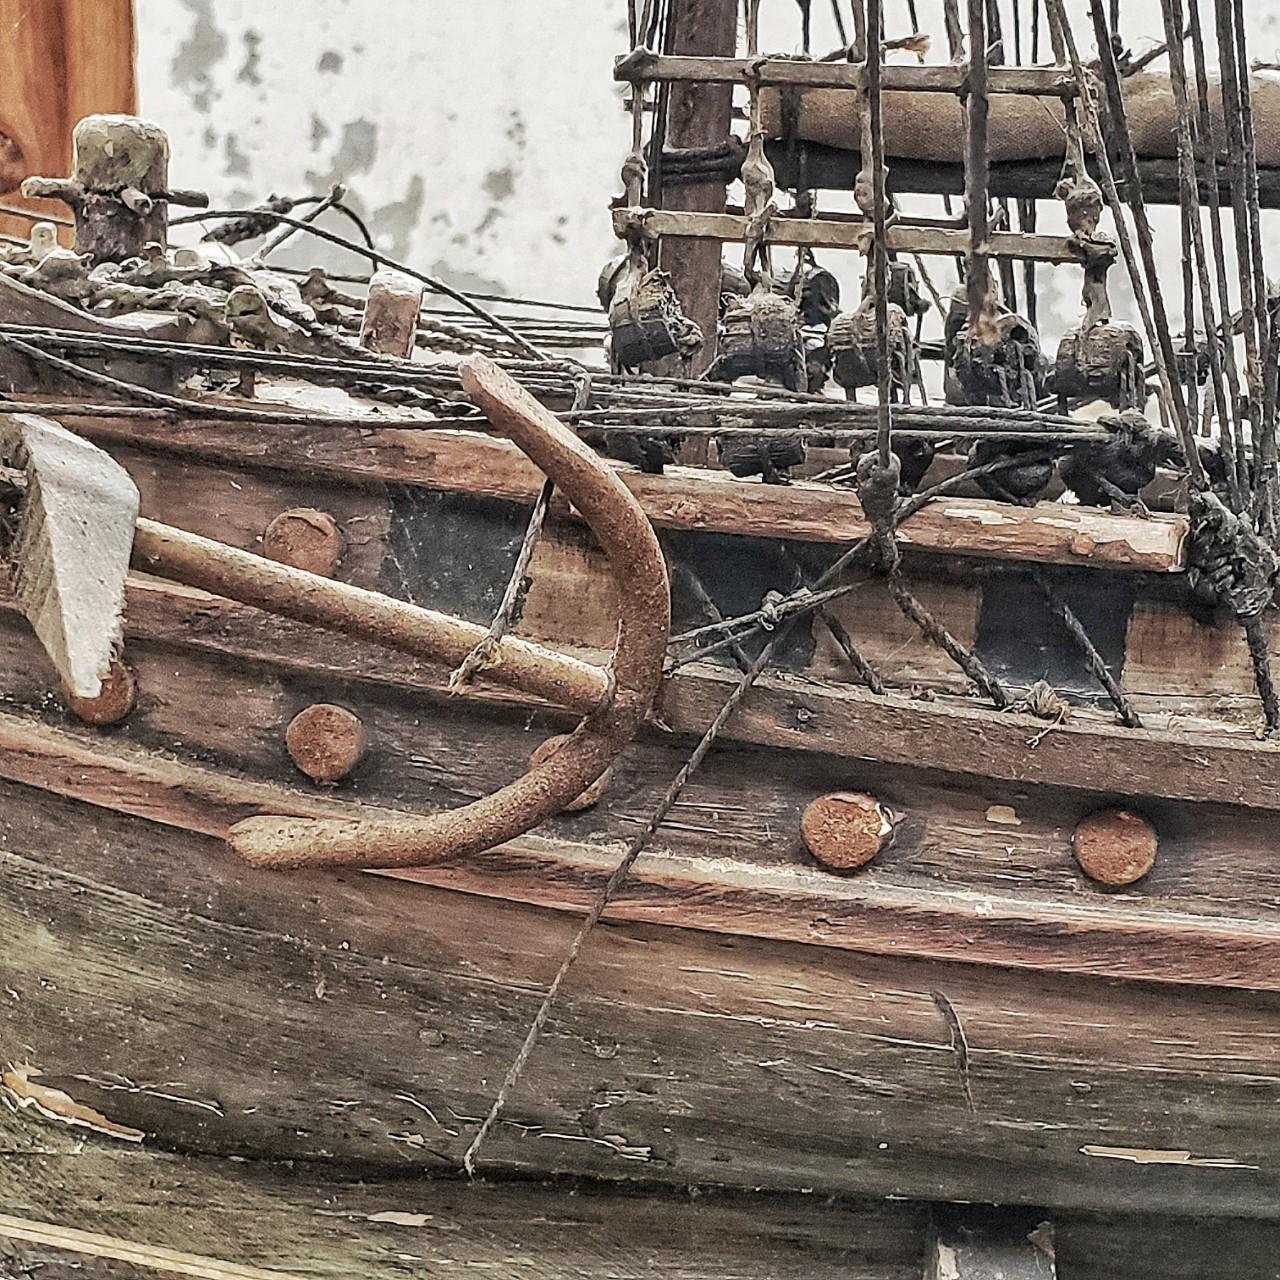 Hand-Crafted Late 19th Century Ship's Model in Crate art object For Sale